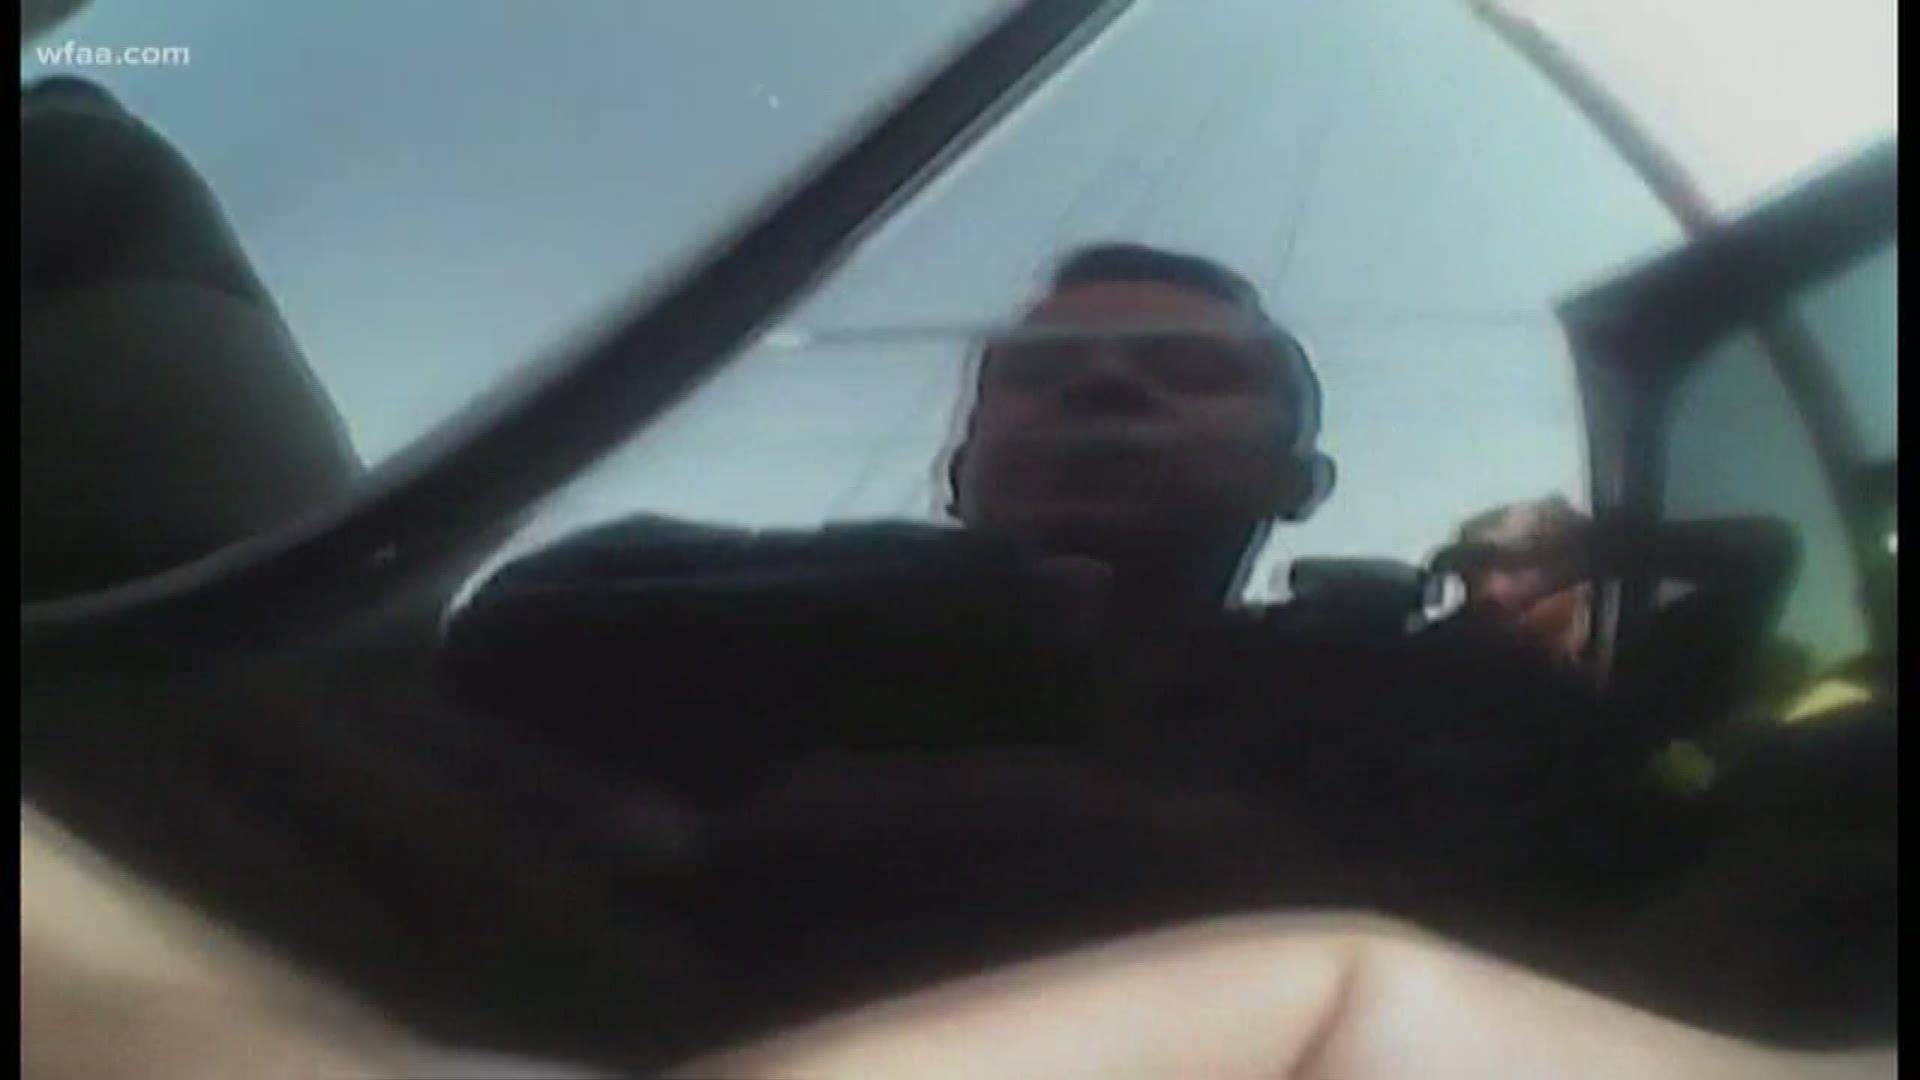 Body cam shows police detain teen with autism